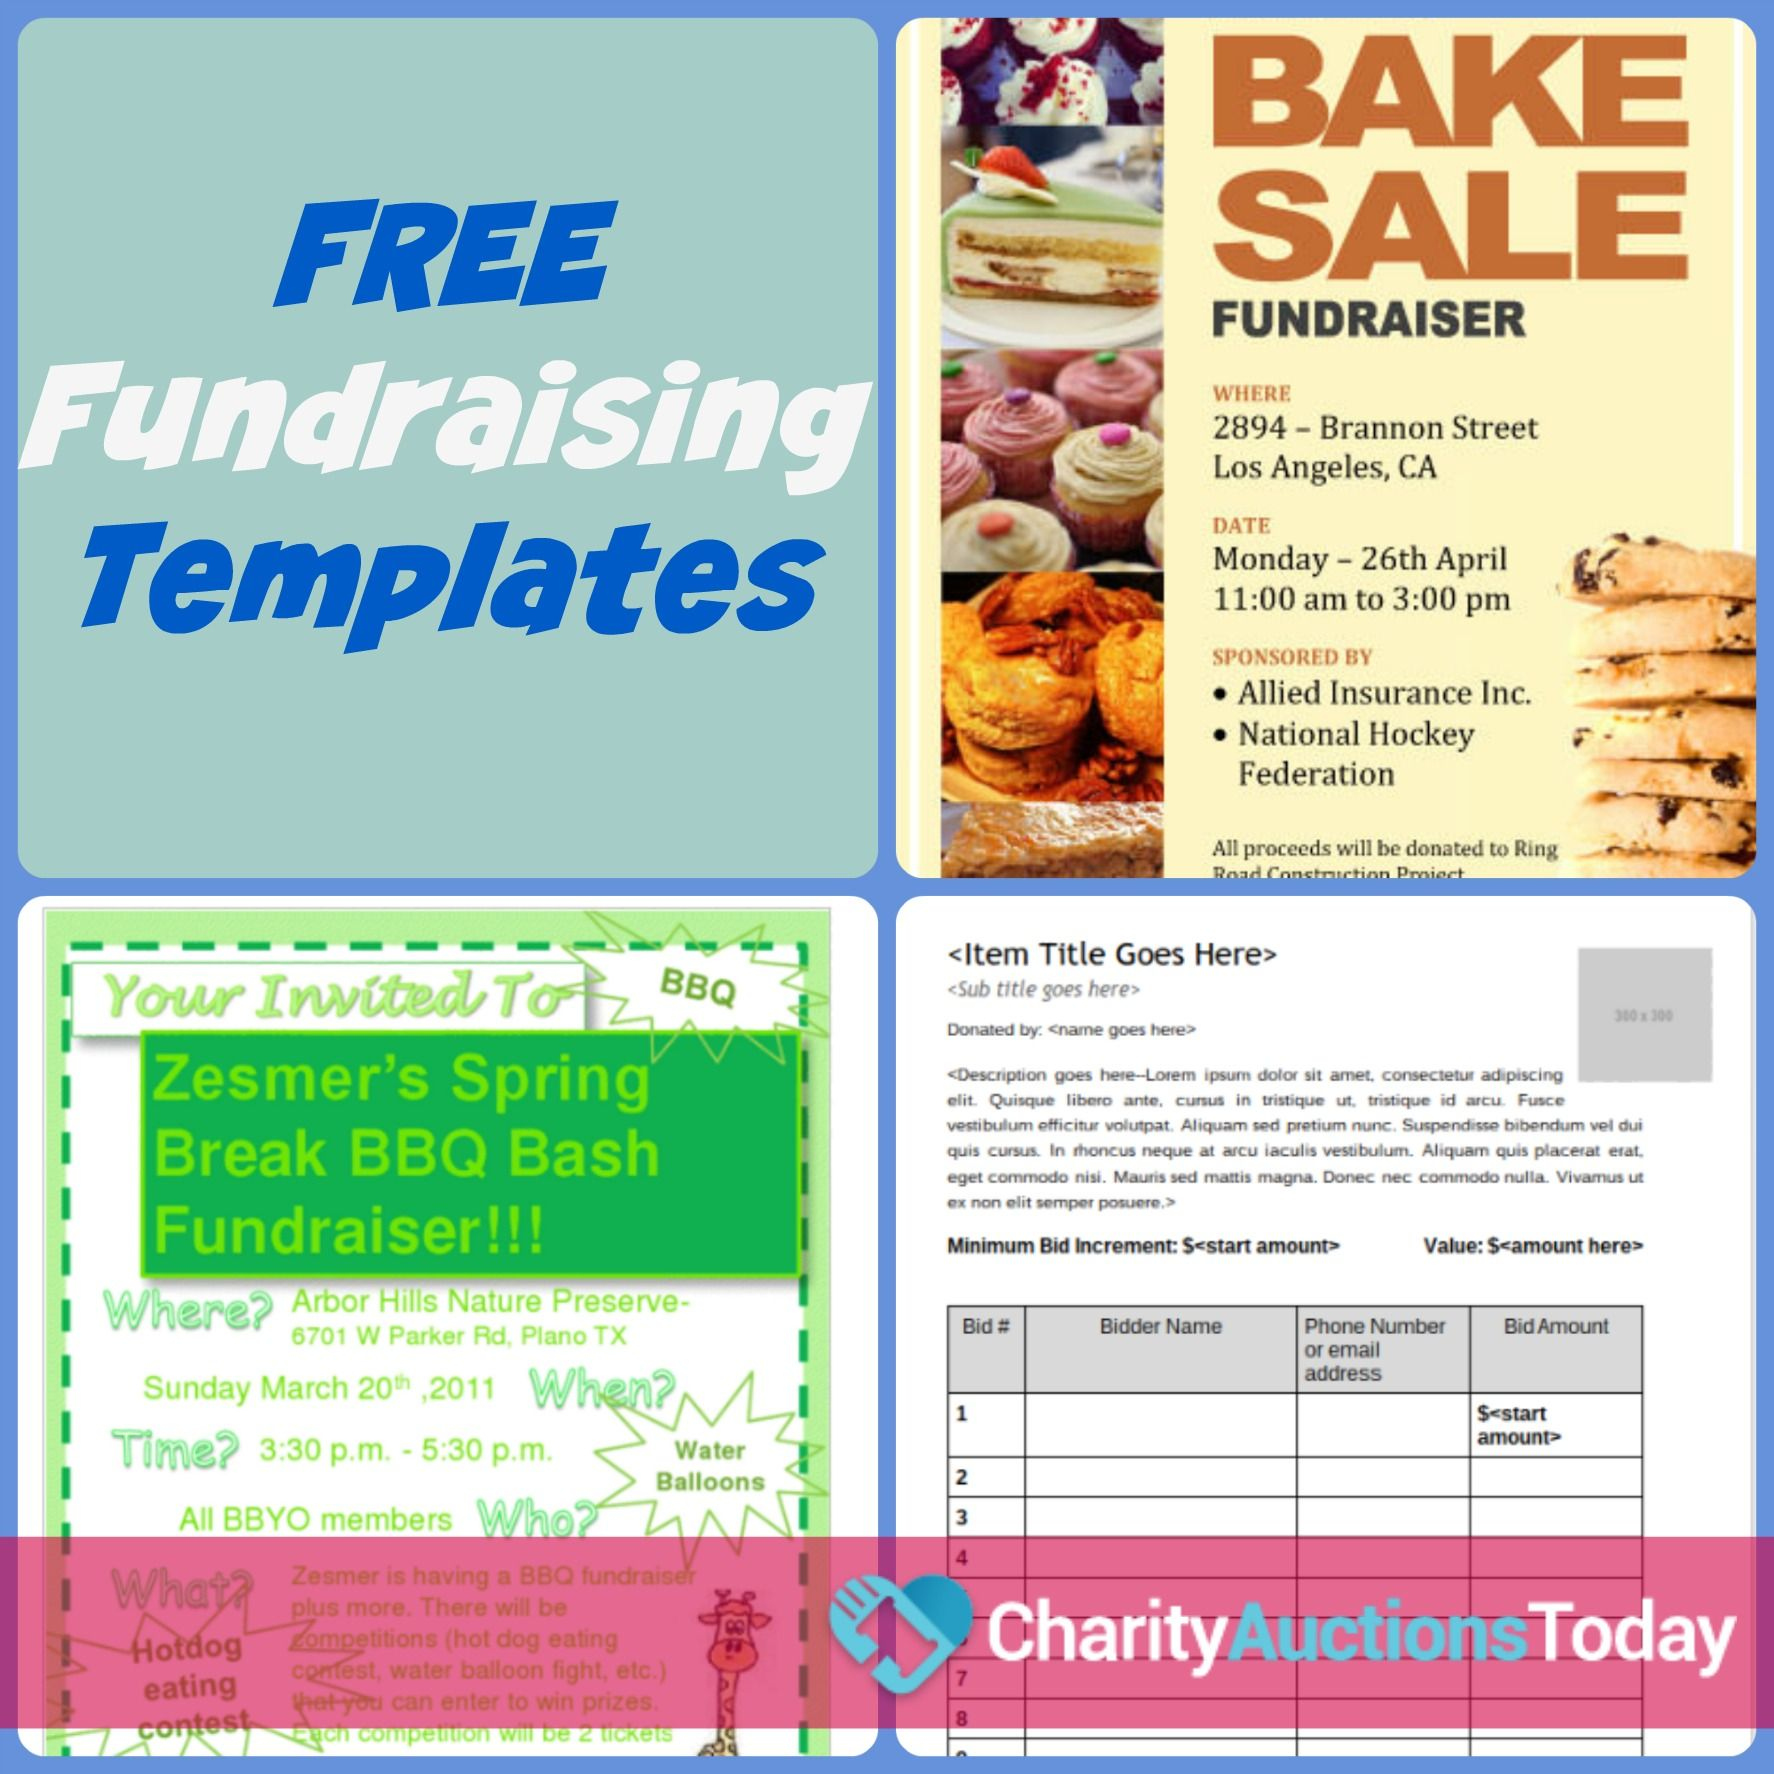 Free Fundraiser Flyer Template | Charityauctionstoday | Fundraiser pertaining to Free Printable Fundraiser Flyer Templates